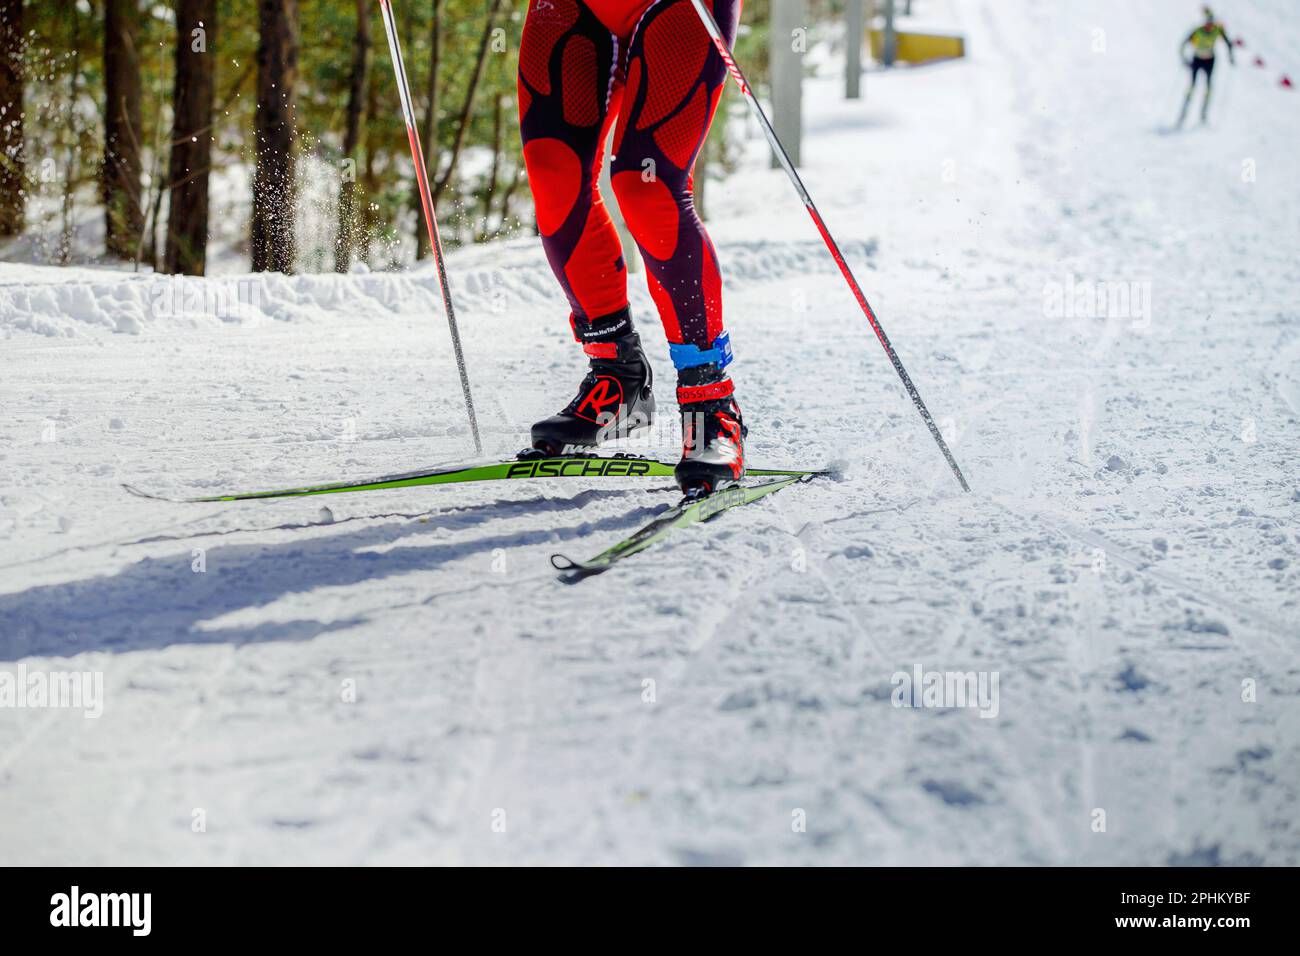 skier athlete running uphill in skiing competition, Fischer racing skis, Rossignol ski boots, HuTag frid tag in legs, winter olympic sports Stock Photo